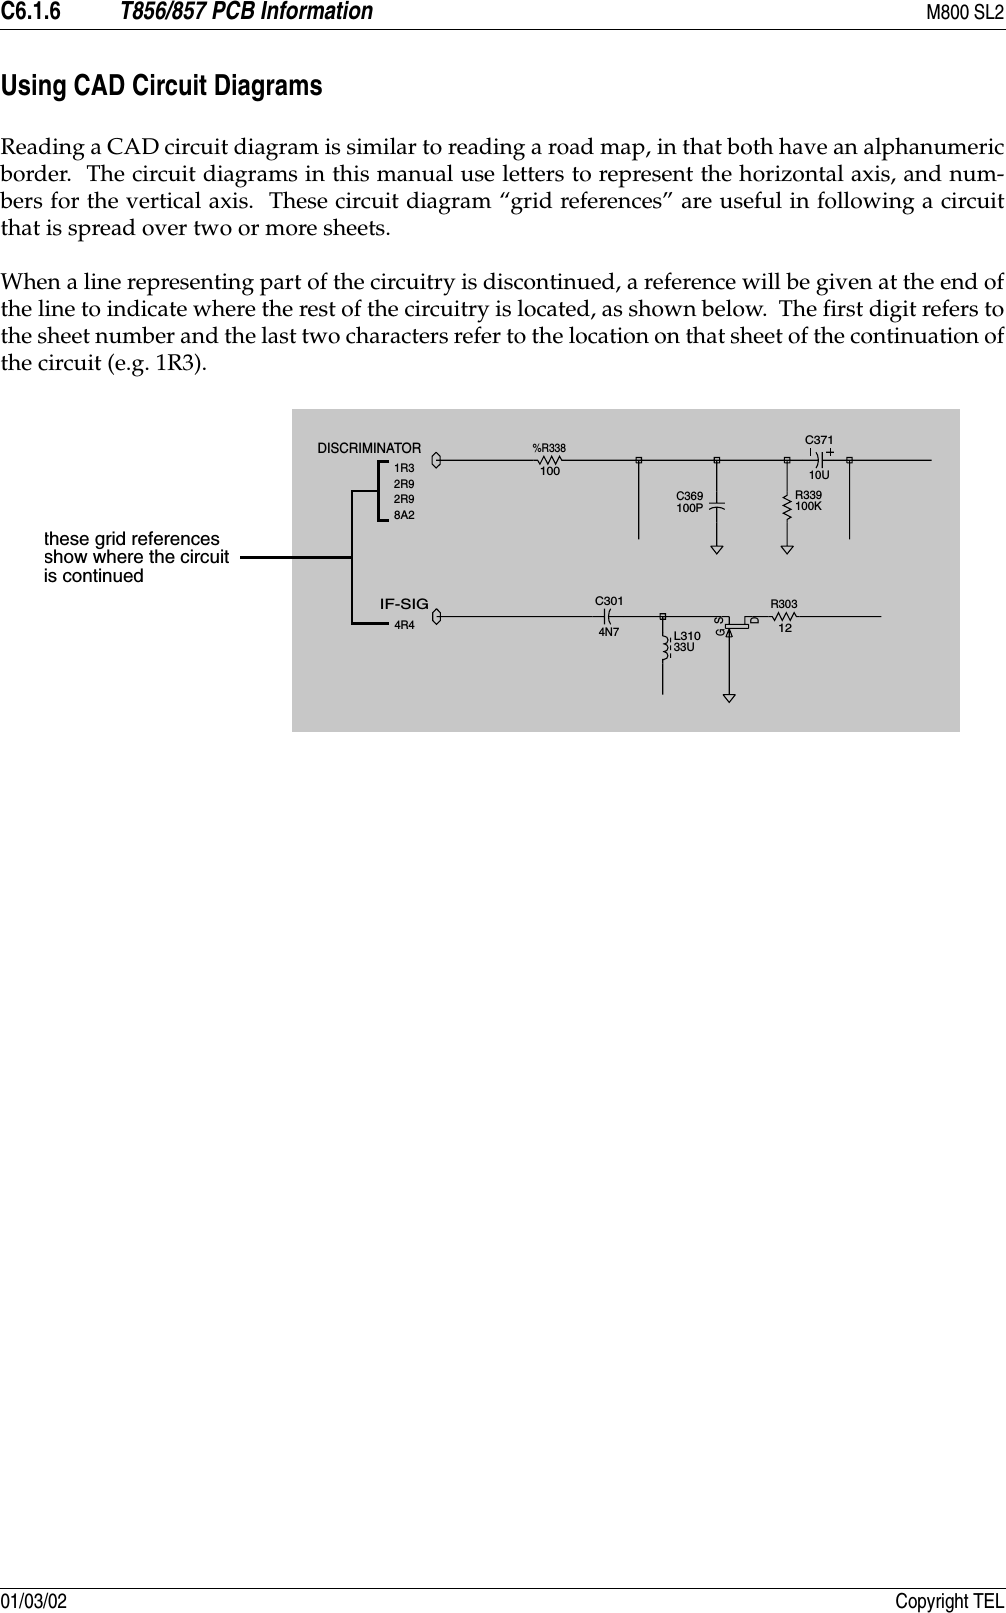 C6.1.6 T856/857 PCB Information M800 SL201/03/02 Copyright TELUsing CAD Circuit DiagramsReading a CAD circuit diagram is similar to reading a road map, in that both have an alphanumericborder.  The circuit diagrams in this manual use letters to represent the horizontal axis, and num-bers for the vertical axis.  These circuit diagram “grid references” are useful in following a circuitthat is spread over two or more sheets.When a line representing part of the circuitry is discontinued, a reference will be given at the end ofthe line to indicate where the rest of the circuitry is located, as shown below.  The first digit refers tothe sheet number and the last two characters refer to the location on that sheet of the continuation ofthe circuit (e.g. 1R3).C3014N7R30312DSGL31033UIF-SIG4R4C369100PC37110UR339100K%R338100DISCRIMINATOR1R32R92R98A2these grid referencesshow where the circuitis continued